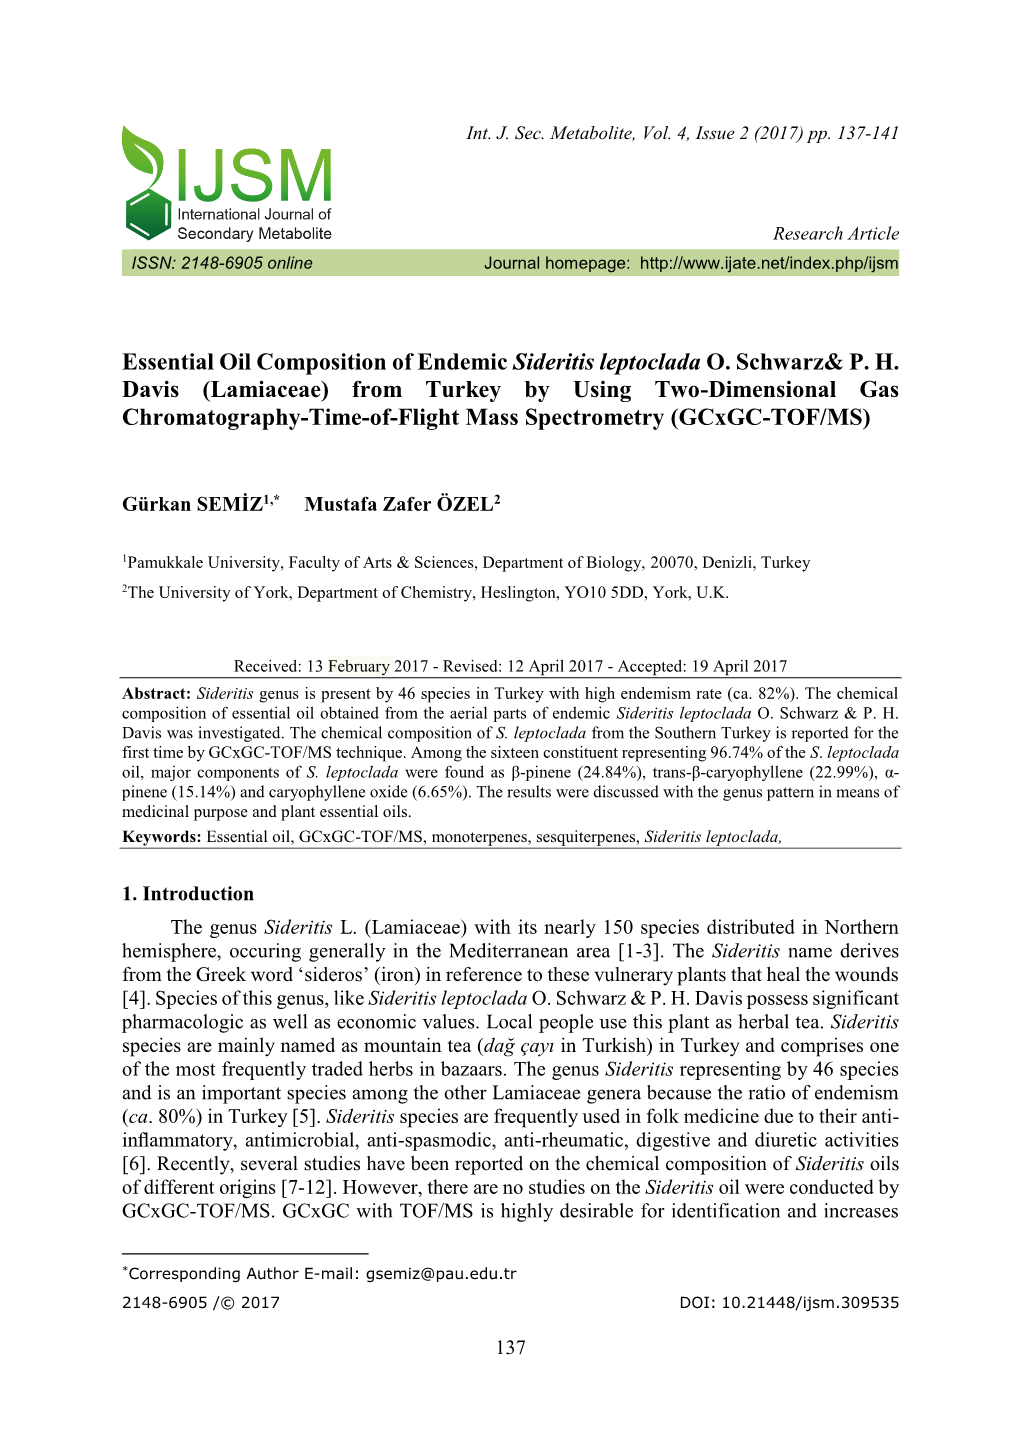 Essential Oil Composition of Endemic Sideritis Leptoclada O